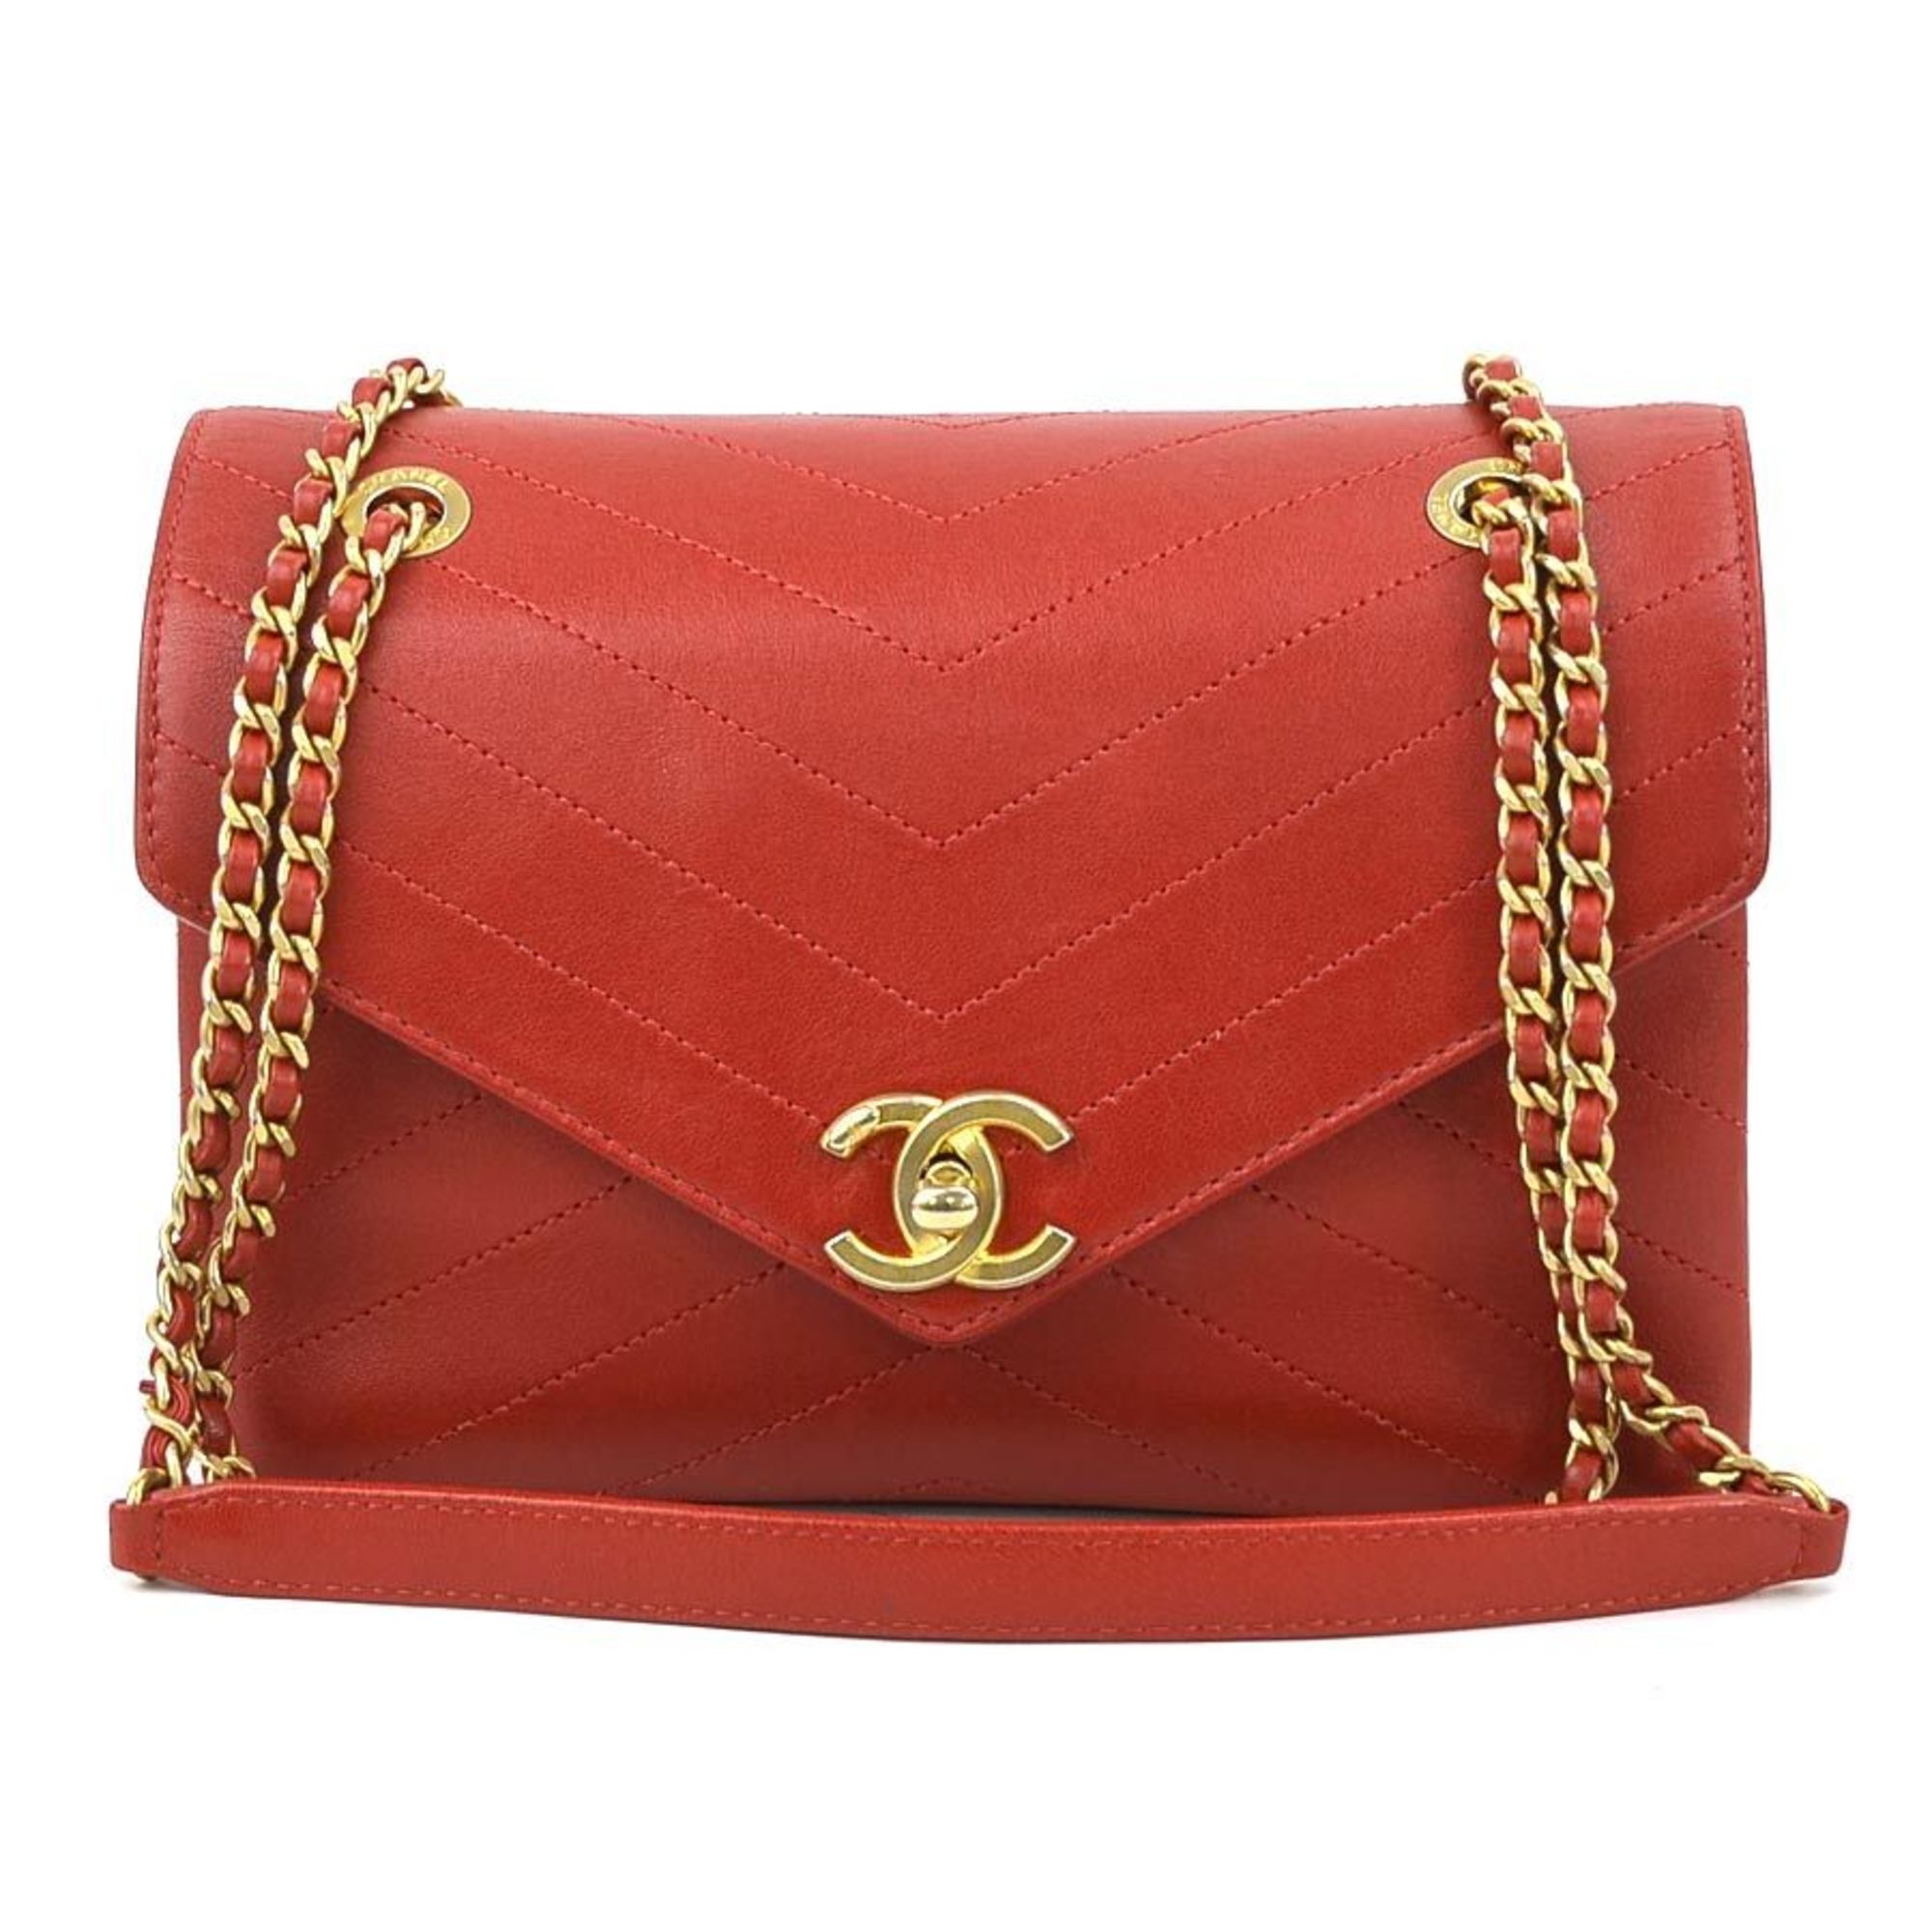 CHANEL Shoulder Bag Chevron Leather Red Women's 99932f